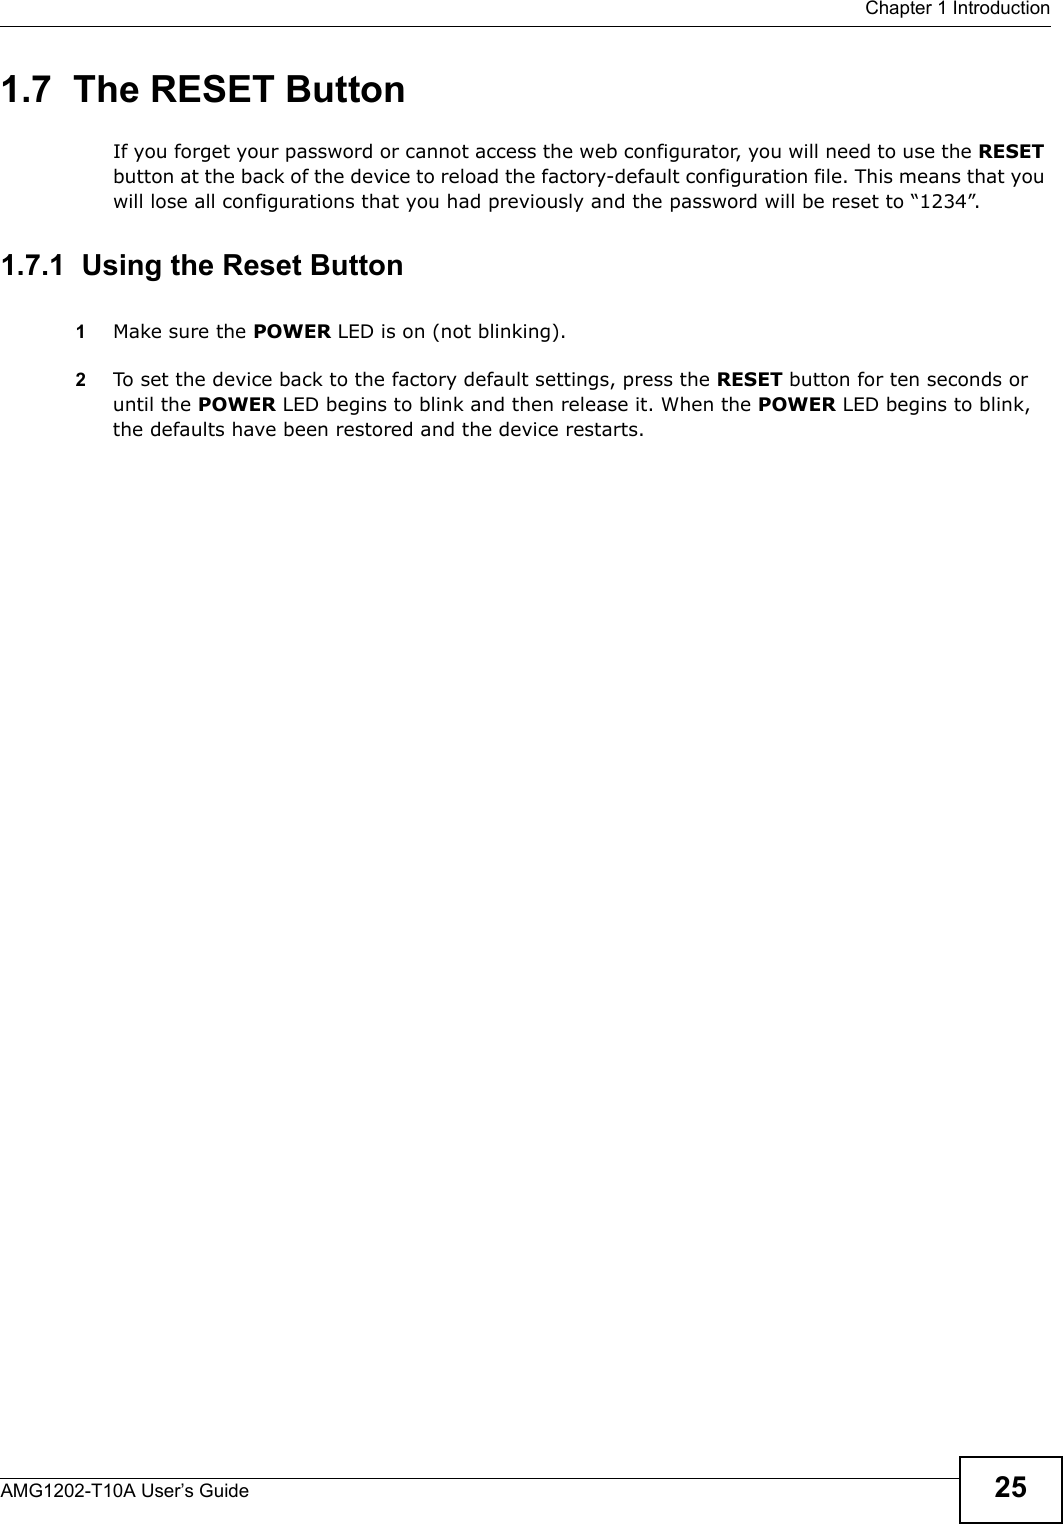  Chapter 1 IntroductionAMG1202-T10A User’s Guide 251.7  The RESET ButtonIf you forget your password or cannot access the web configurator, you will need to use the RESET button at the back of the device to reload the factory-default configuration file. This means that you will lose all configurations that you had previously and the password will be reset to “1234”. 1.7.1  Using the Reset Button1Make sure the POWER LED is on (not blinking).2To set the device back to the factory default settings, press the RESET button for ten seconds or until the POWER LED begins to blink and then release it. When the POWER LED begins to blink, the defaults have been restored and the device restarts.